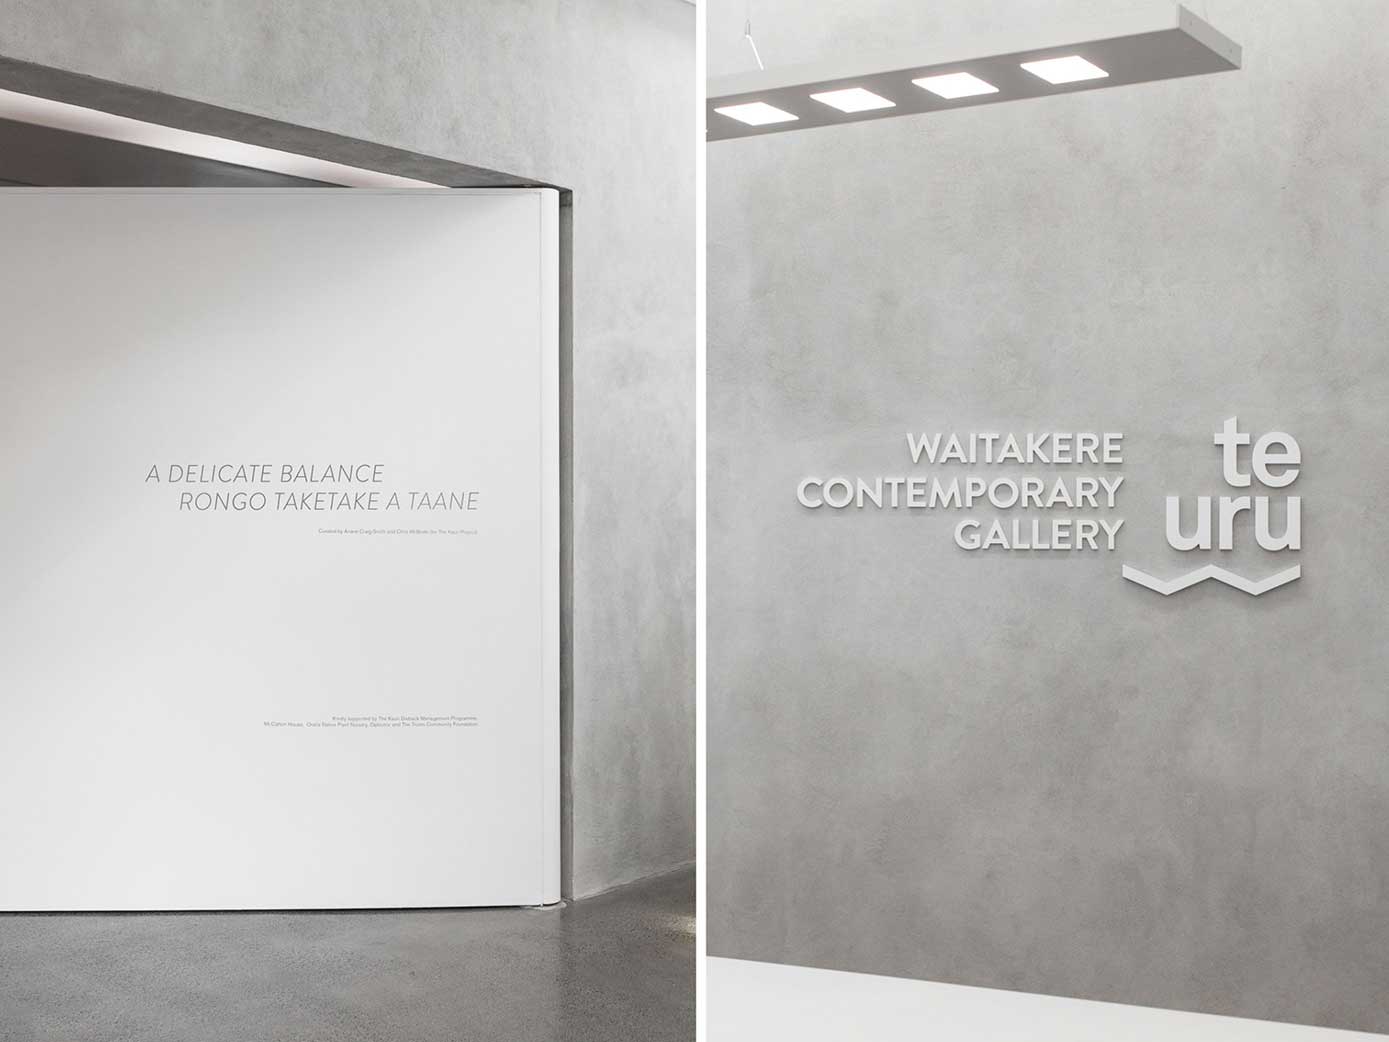 Environmental graphics and signage as it appears within the gallery